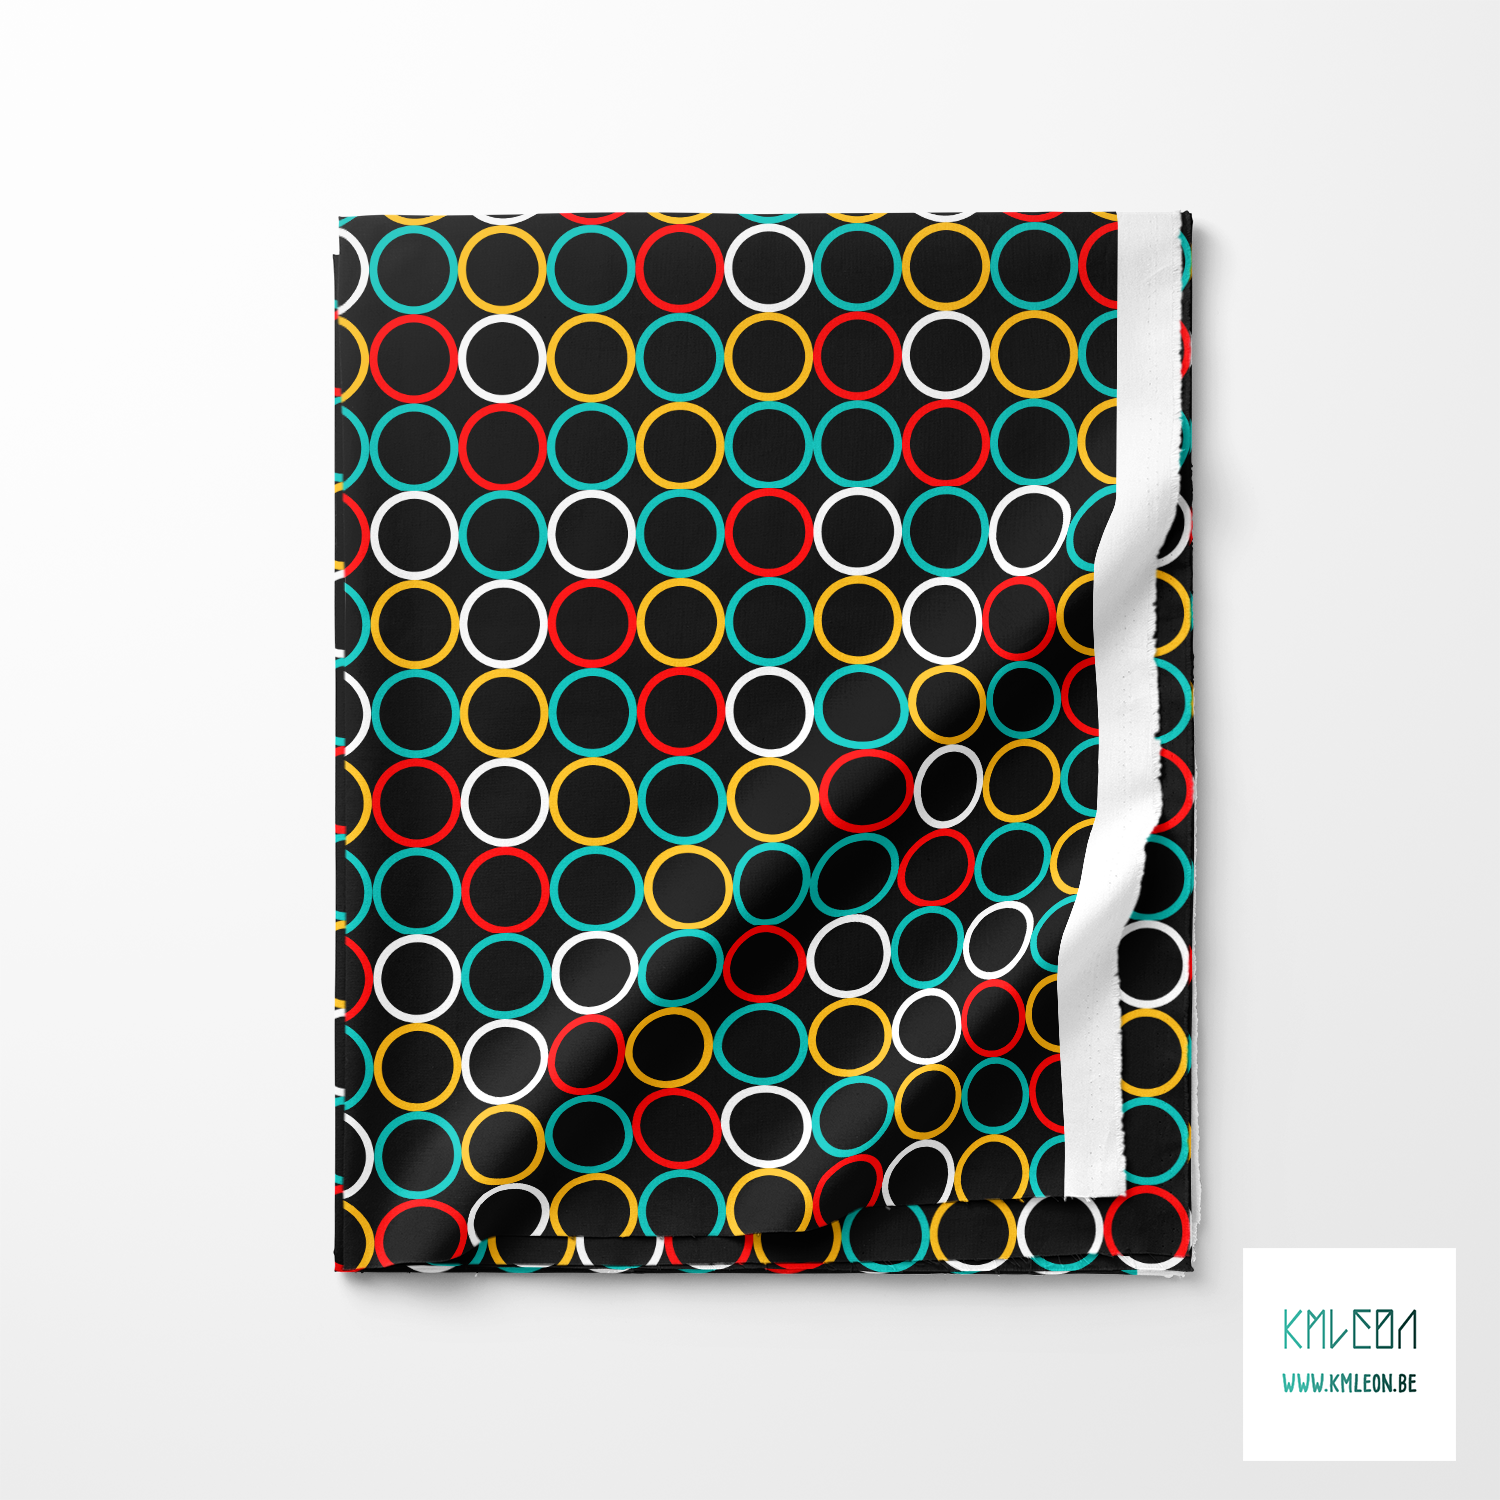 Random yellow, red, teal and white circles fabric